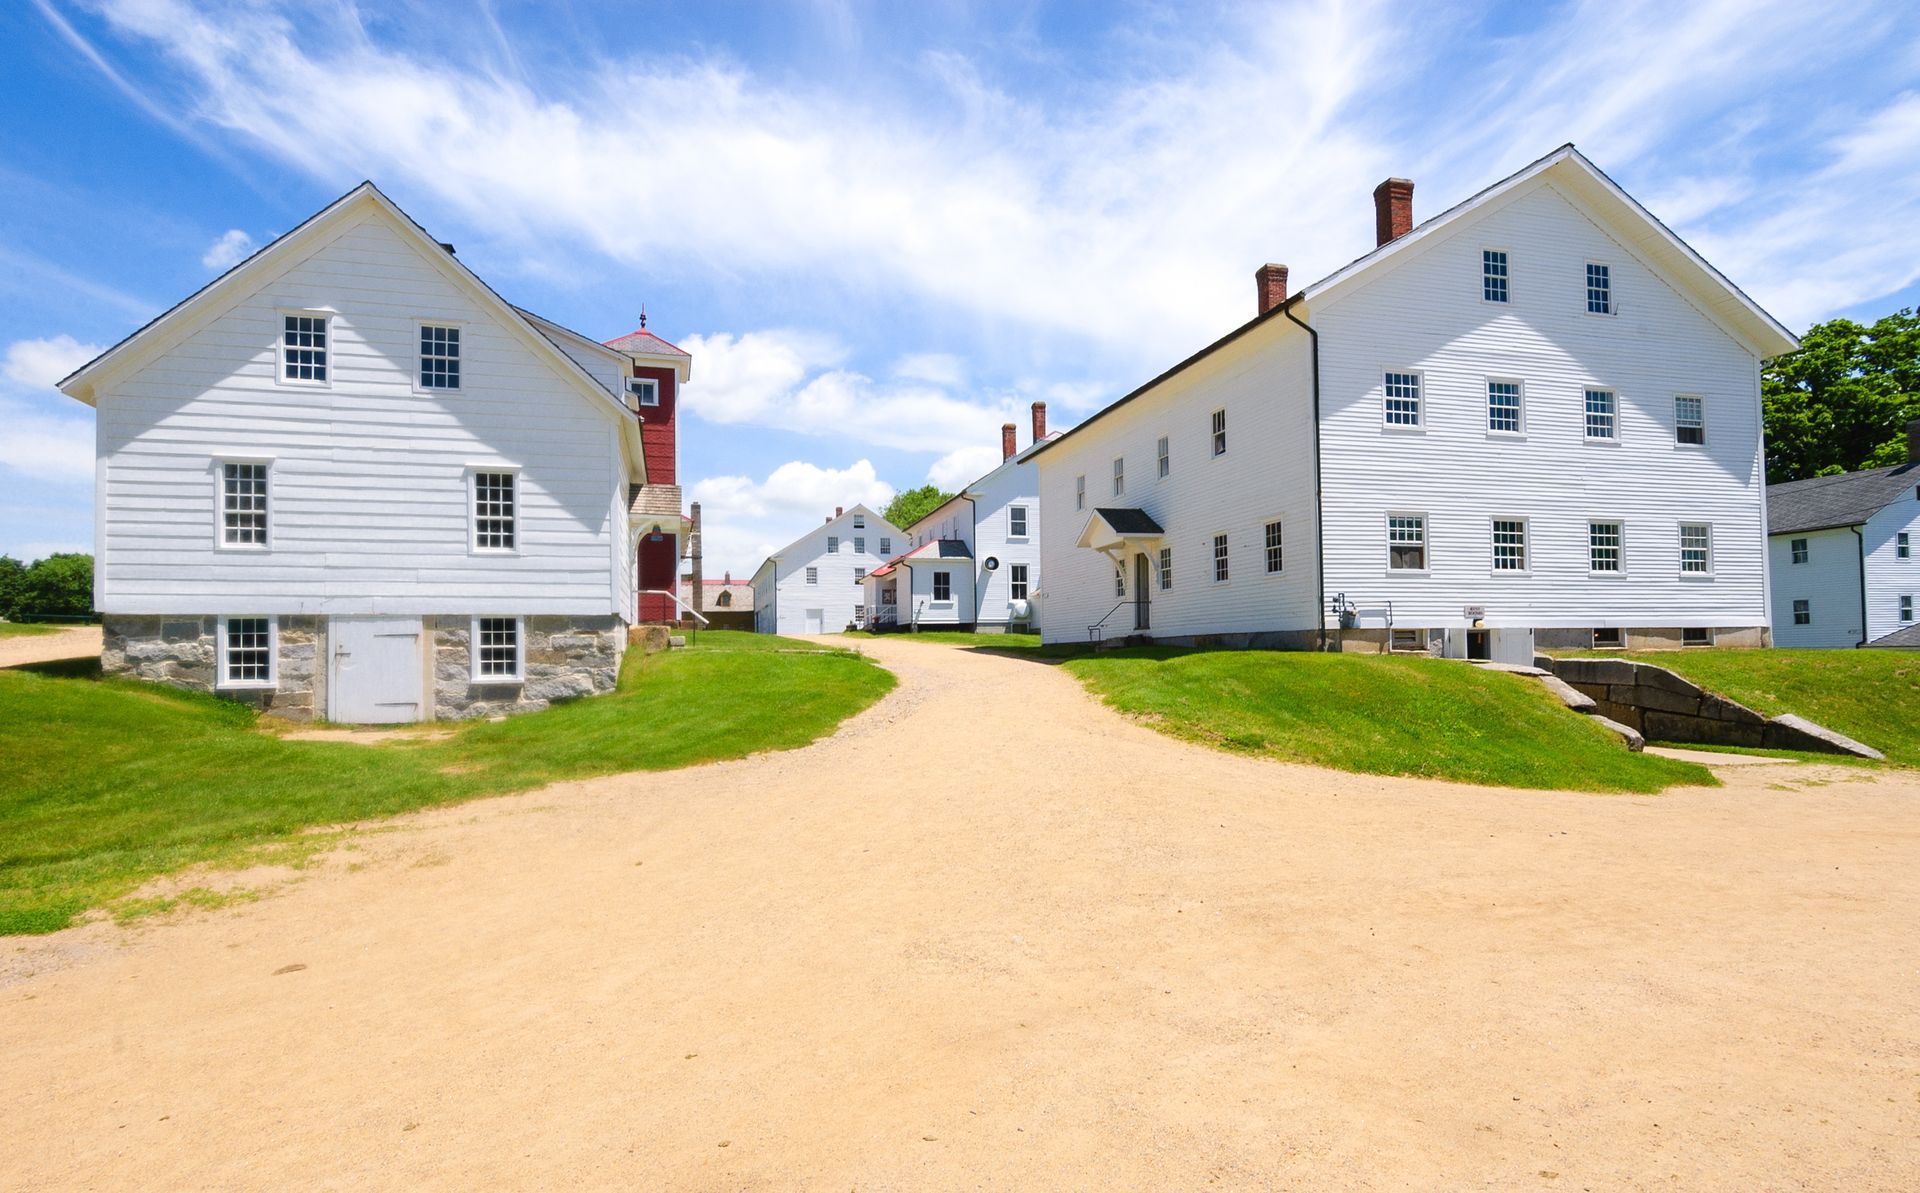 a row of white houses on a dirt road